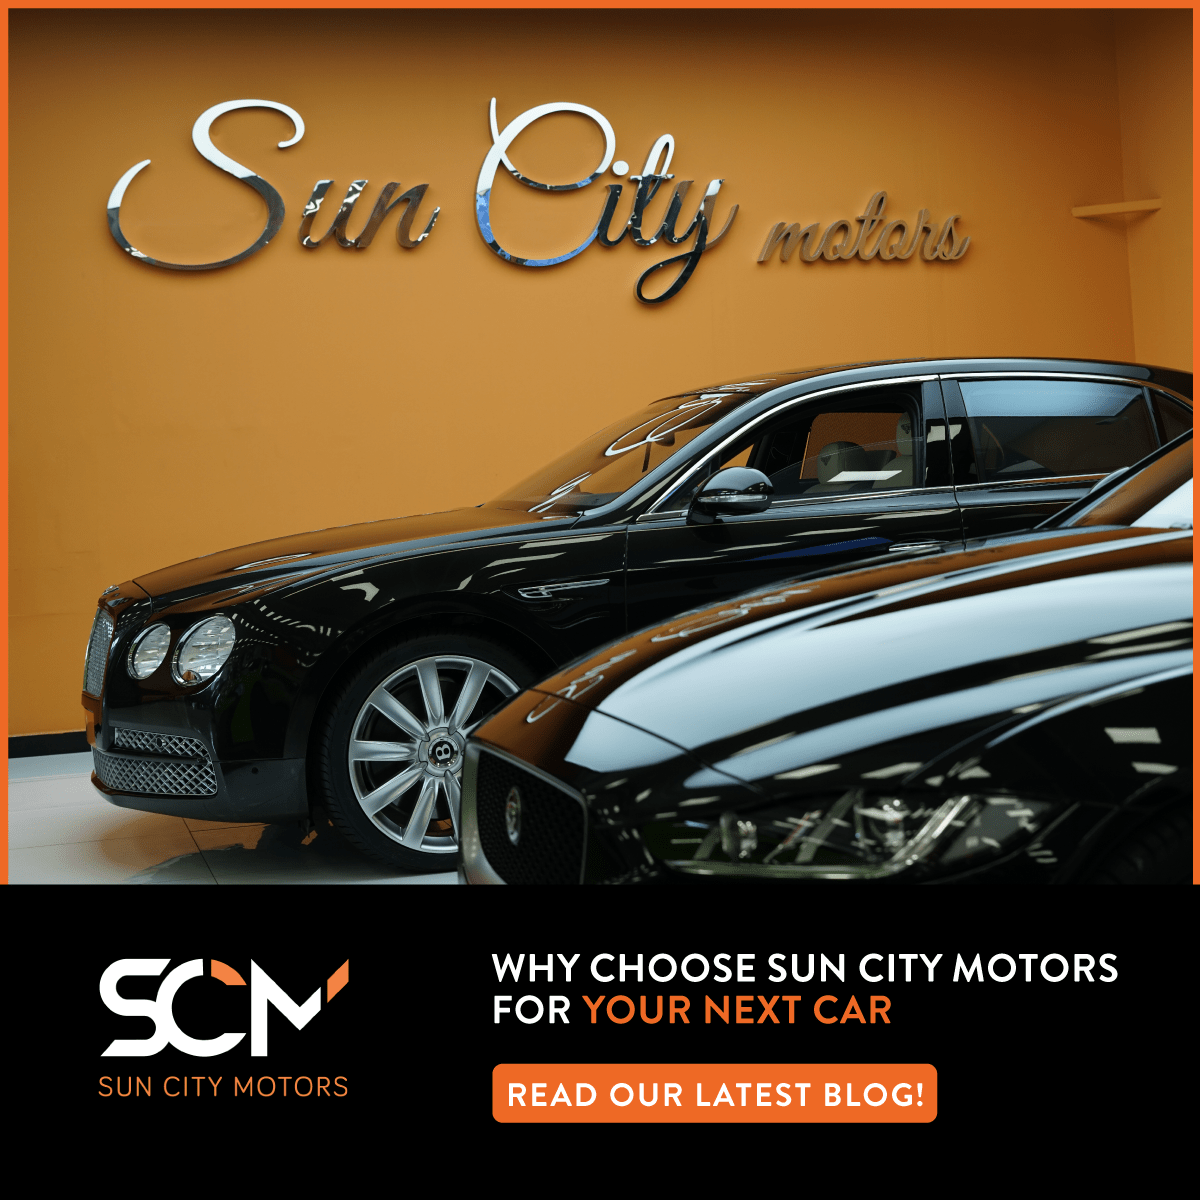 Why Choose Sun City Motors for Your Next Car Purchase